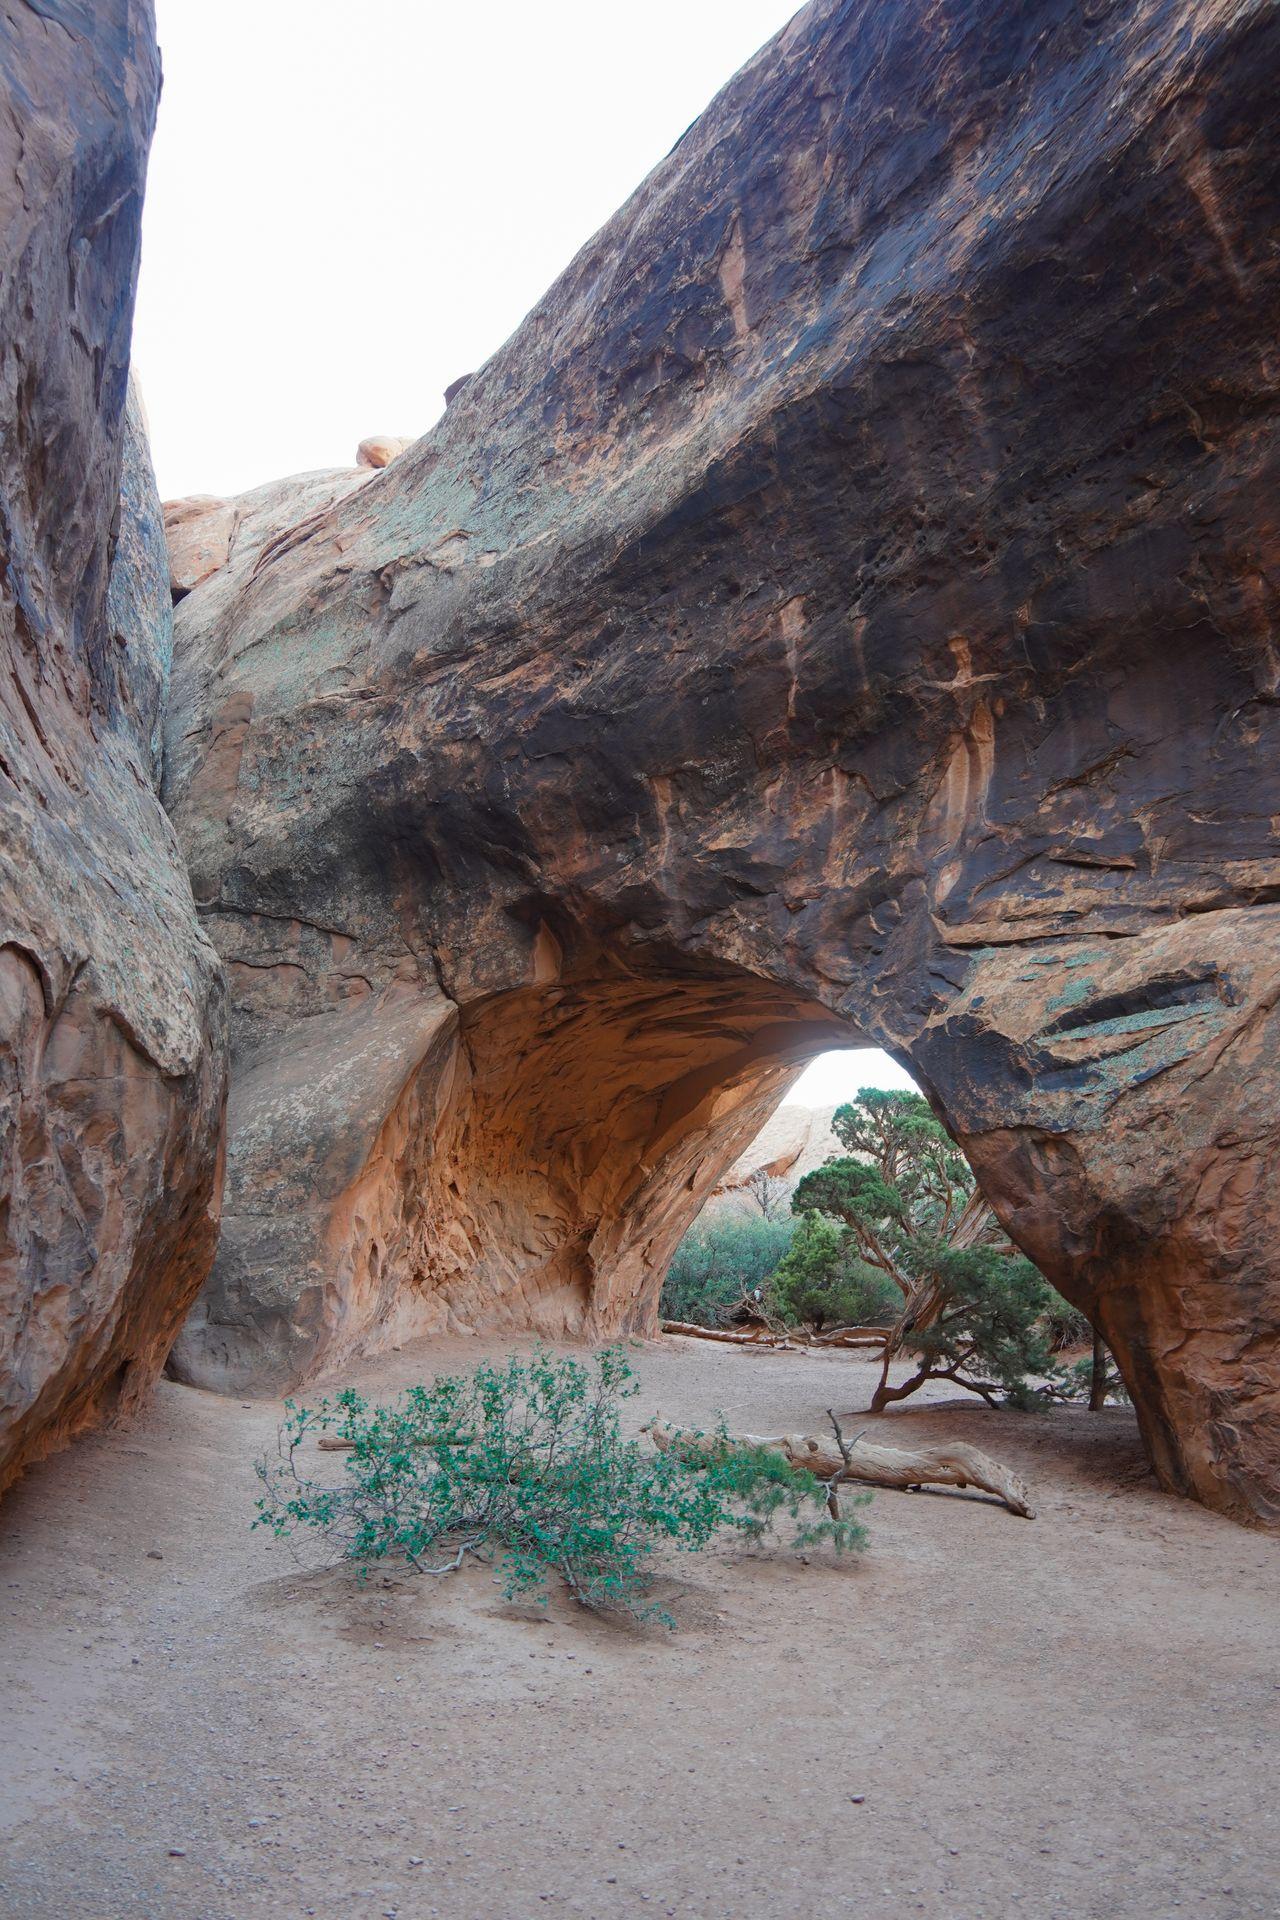 The Navajo Arch on the Devil's Garden trail. The arch is brown and the floor below is sandy